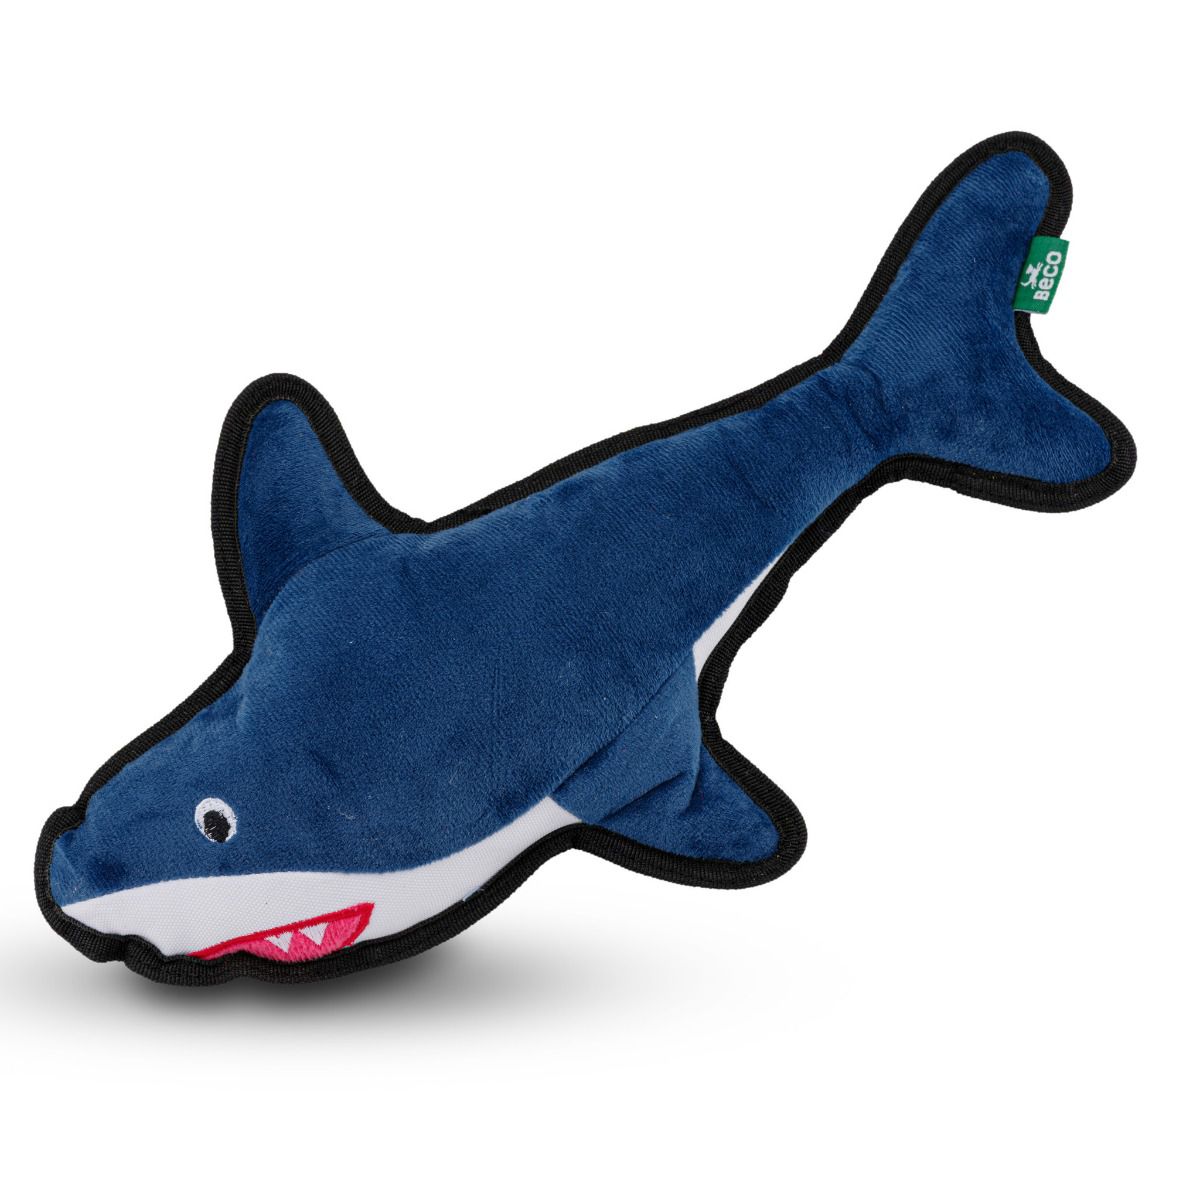 Afbeelding Beco Plush Toy Shark – Knuffel Hond